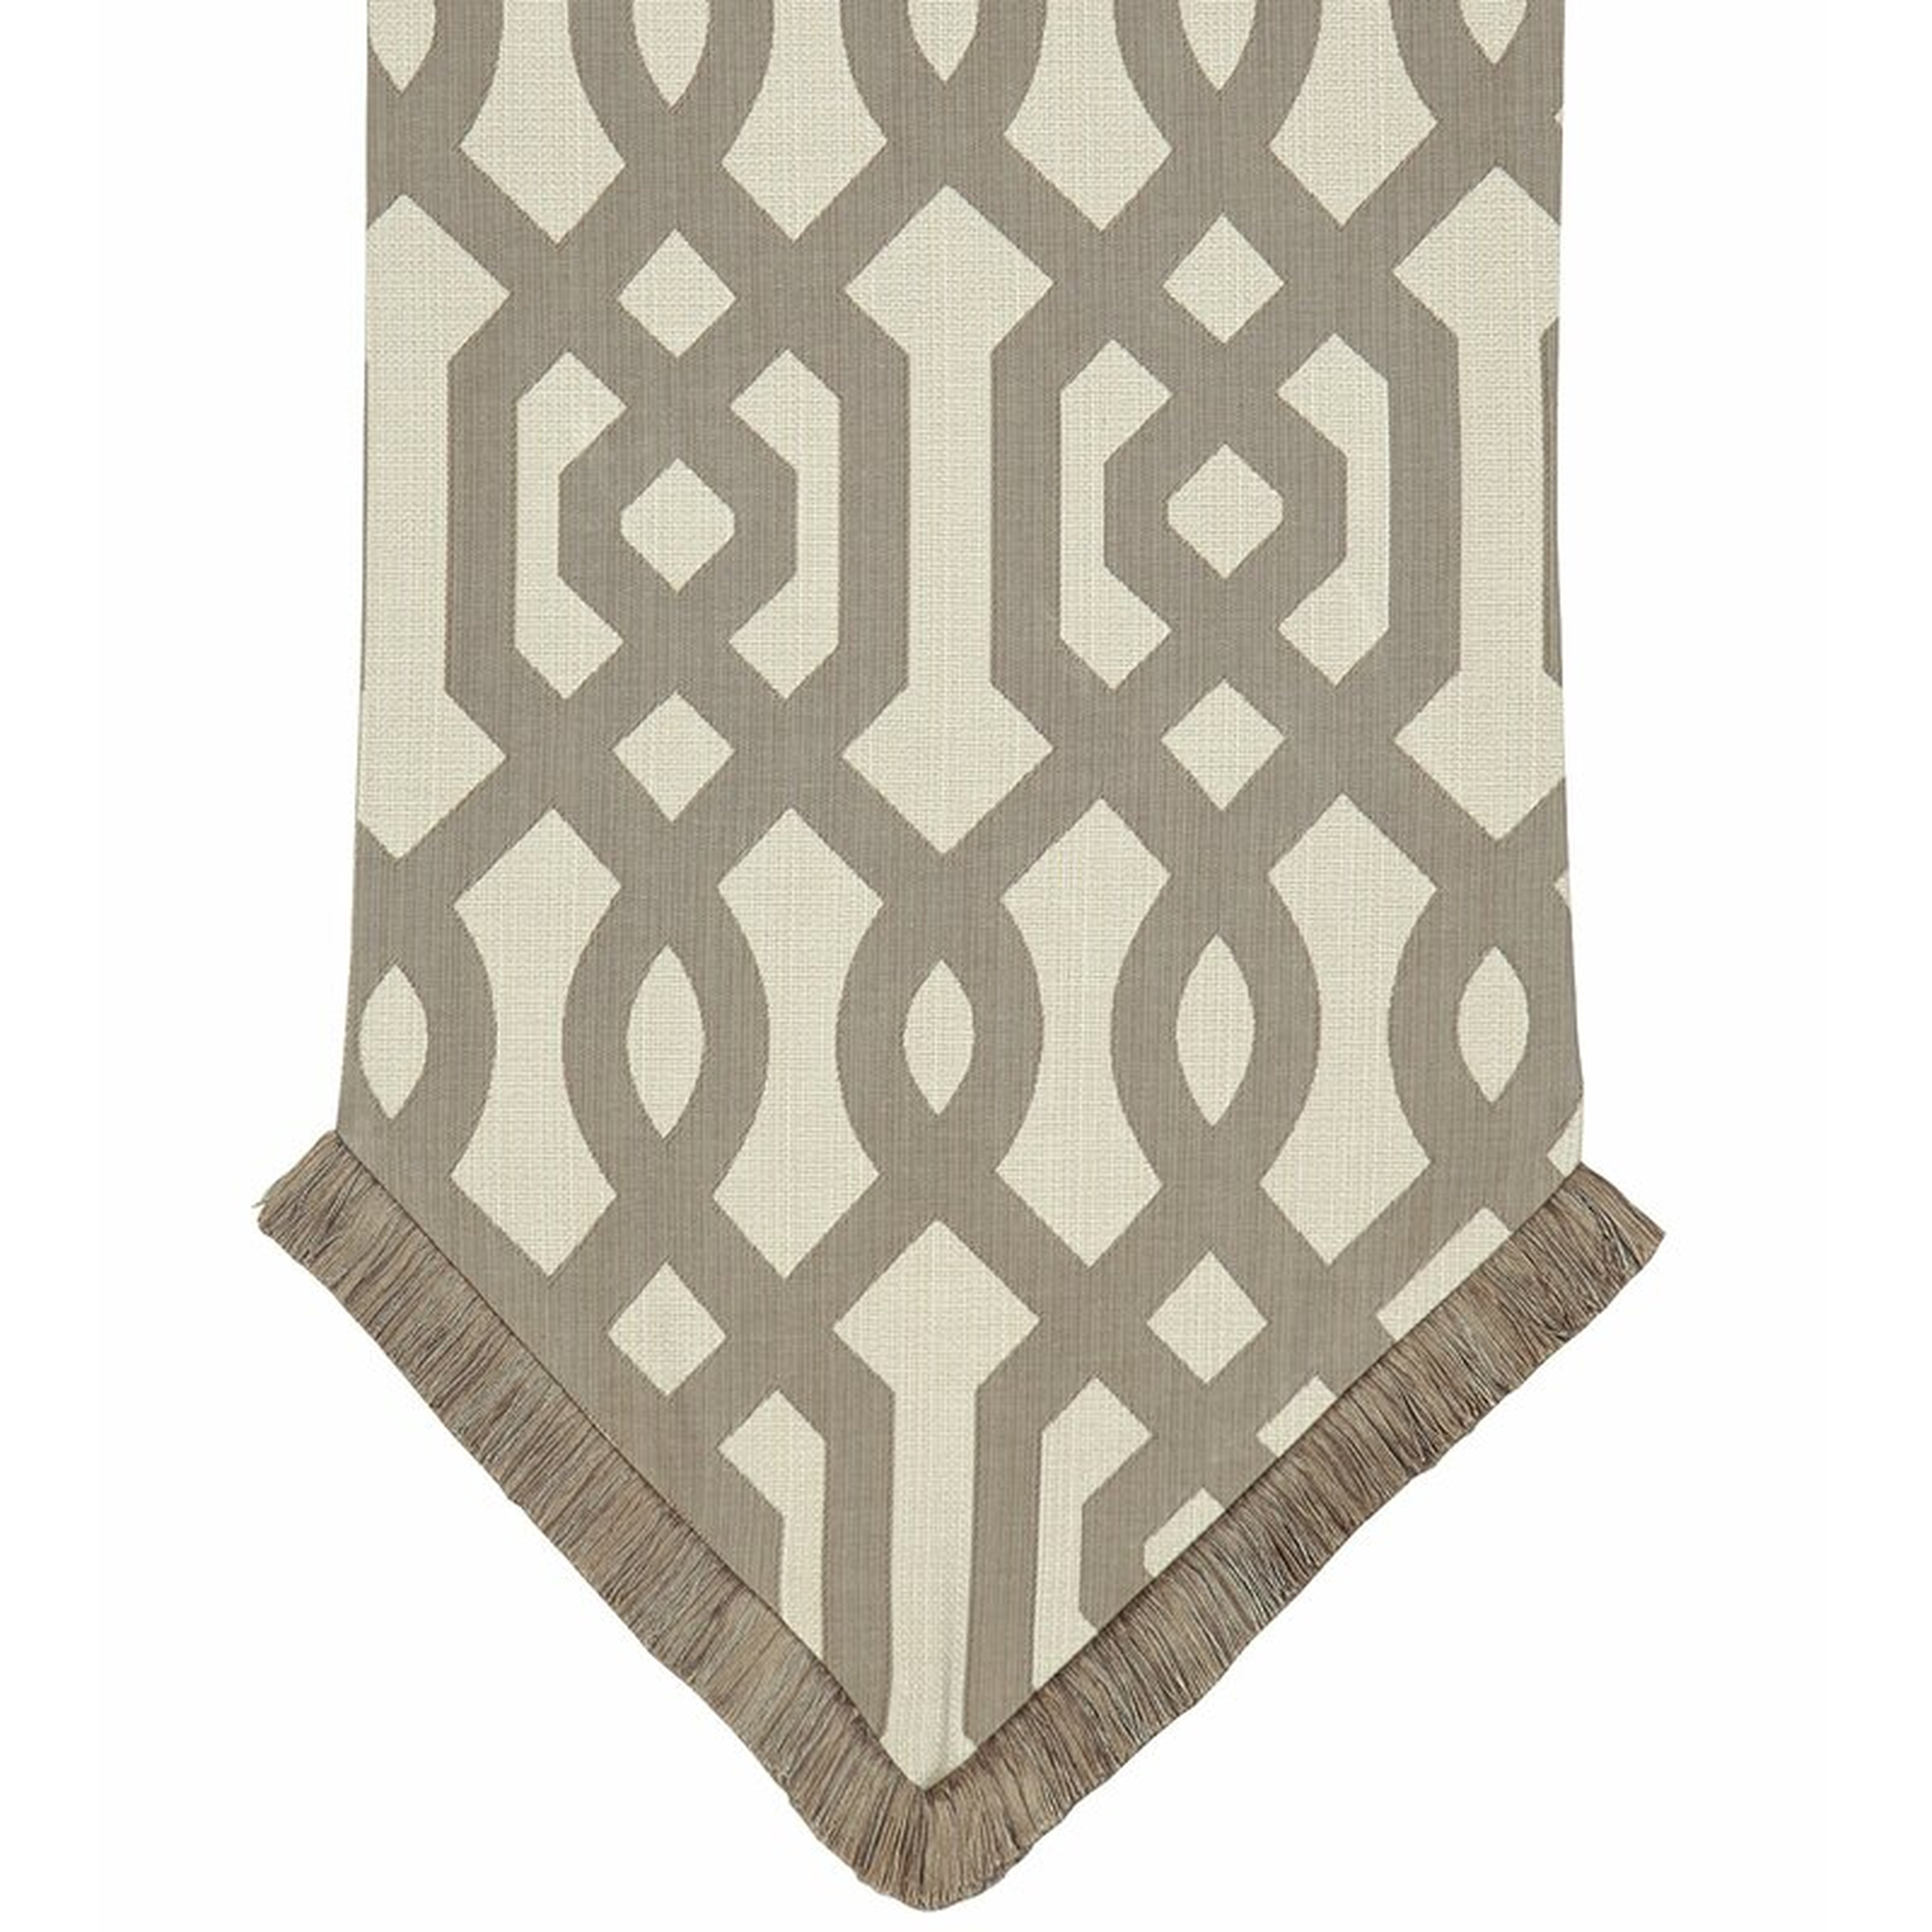 Eastern Accents Rayland Table Runner - Perigold